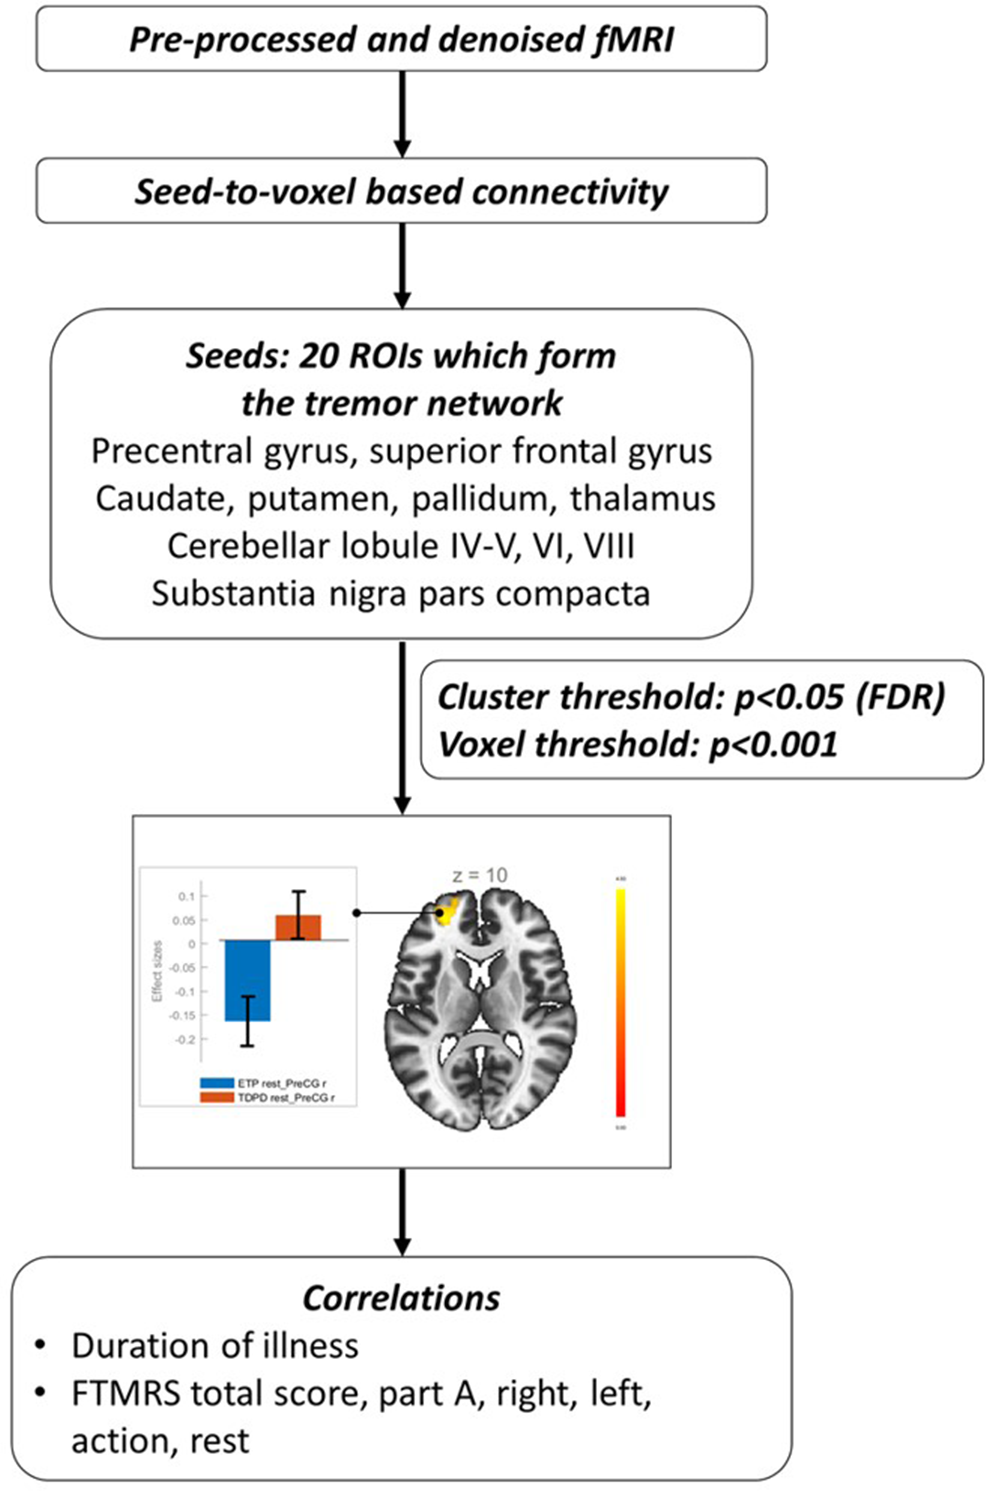 Differential patterns of functional connectivity in tremor dominant Parkinson’s disease and essential tremor plus